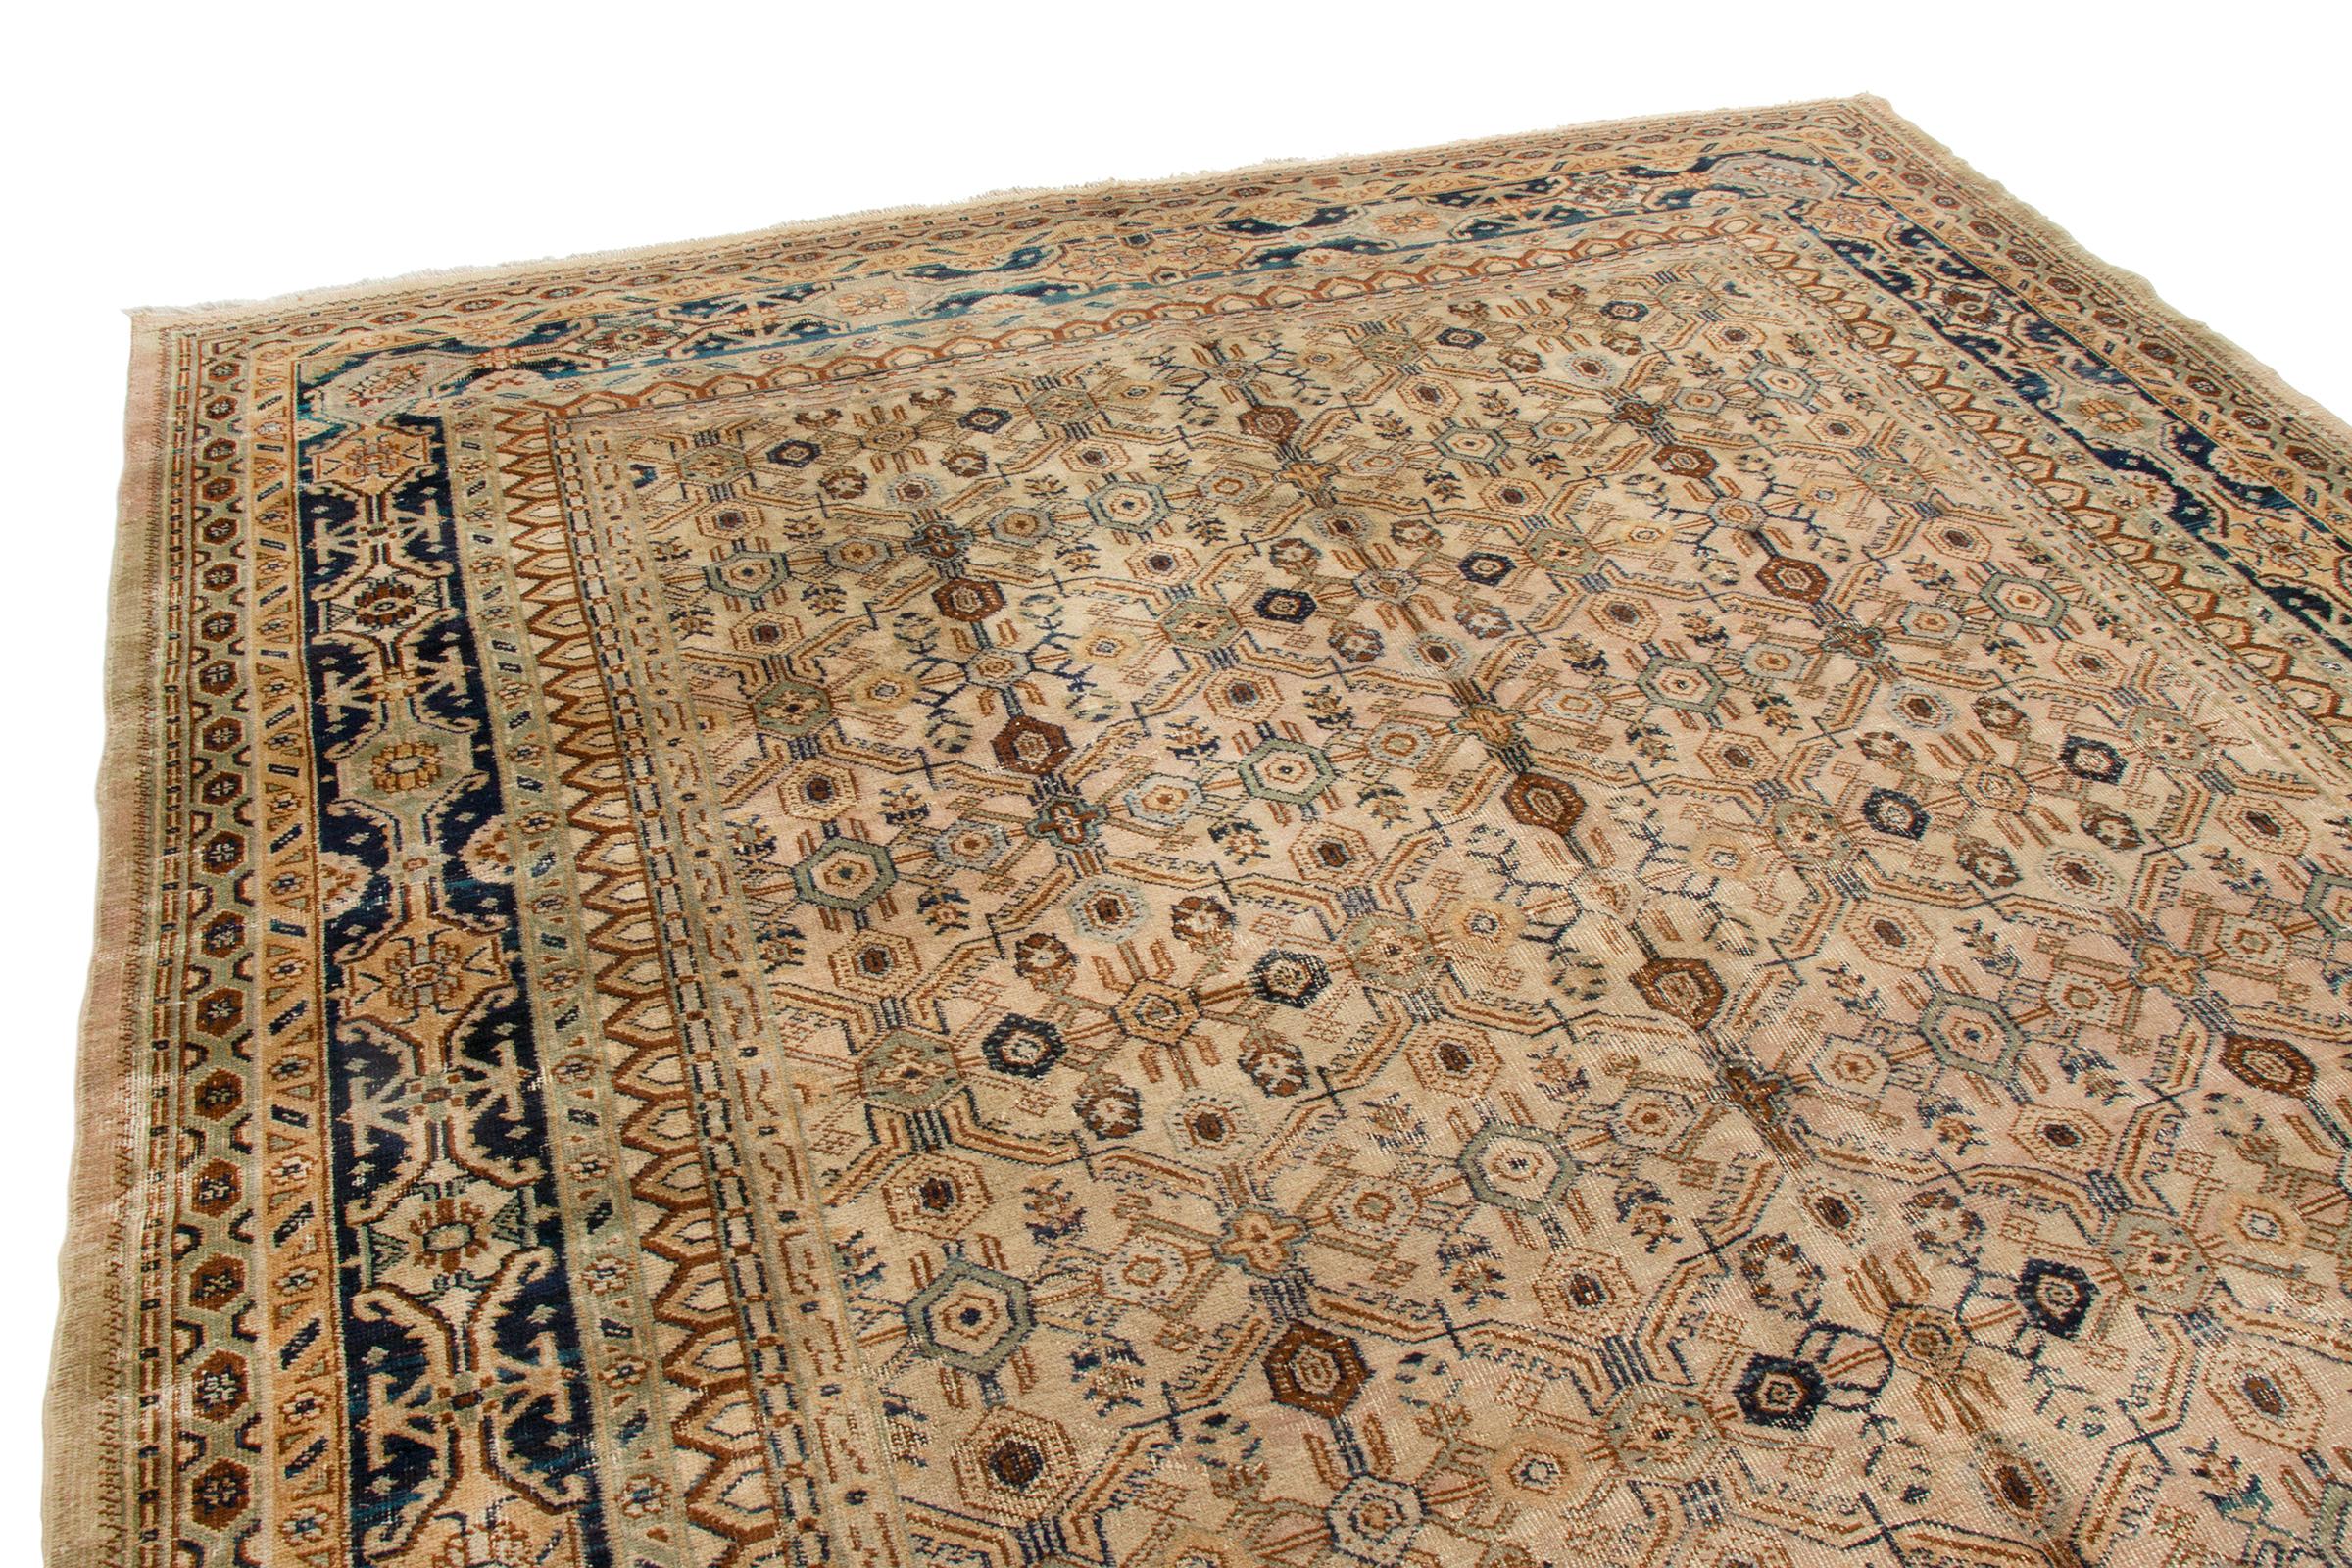 This rare 1920 Samarkand Khotan rug by Rug and Kilim is smart and serious, adding distinction, culture, and class to any space. The transitional geometric style is archaic with small print, exuding finesse and a meticulous nature in earthen brown,